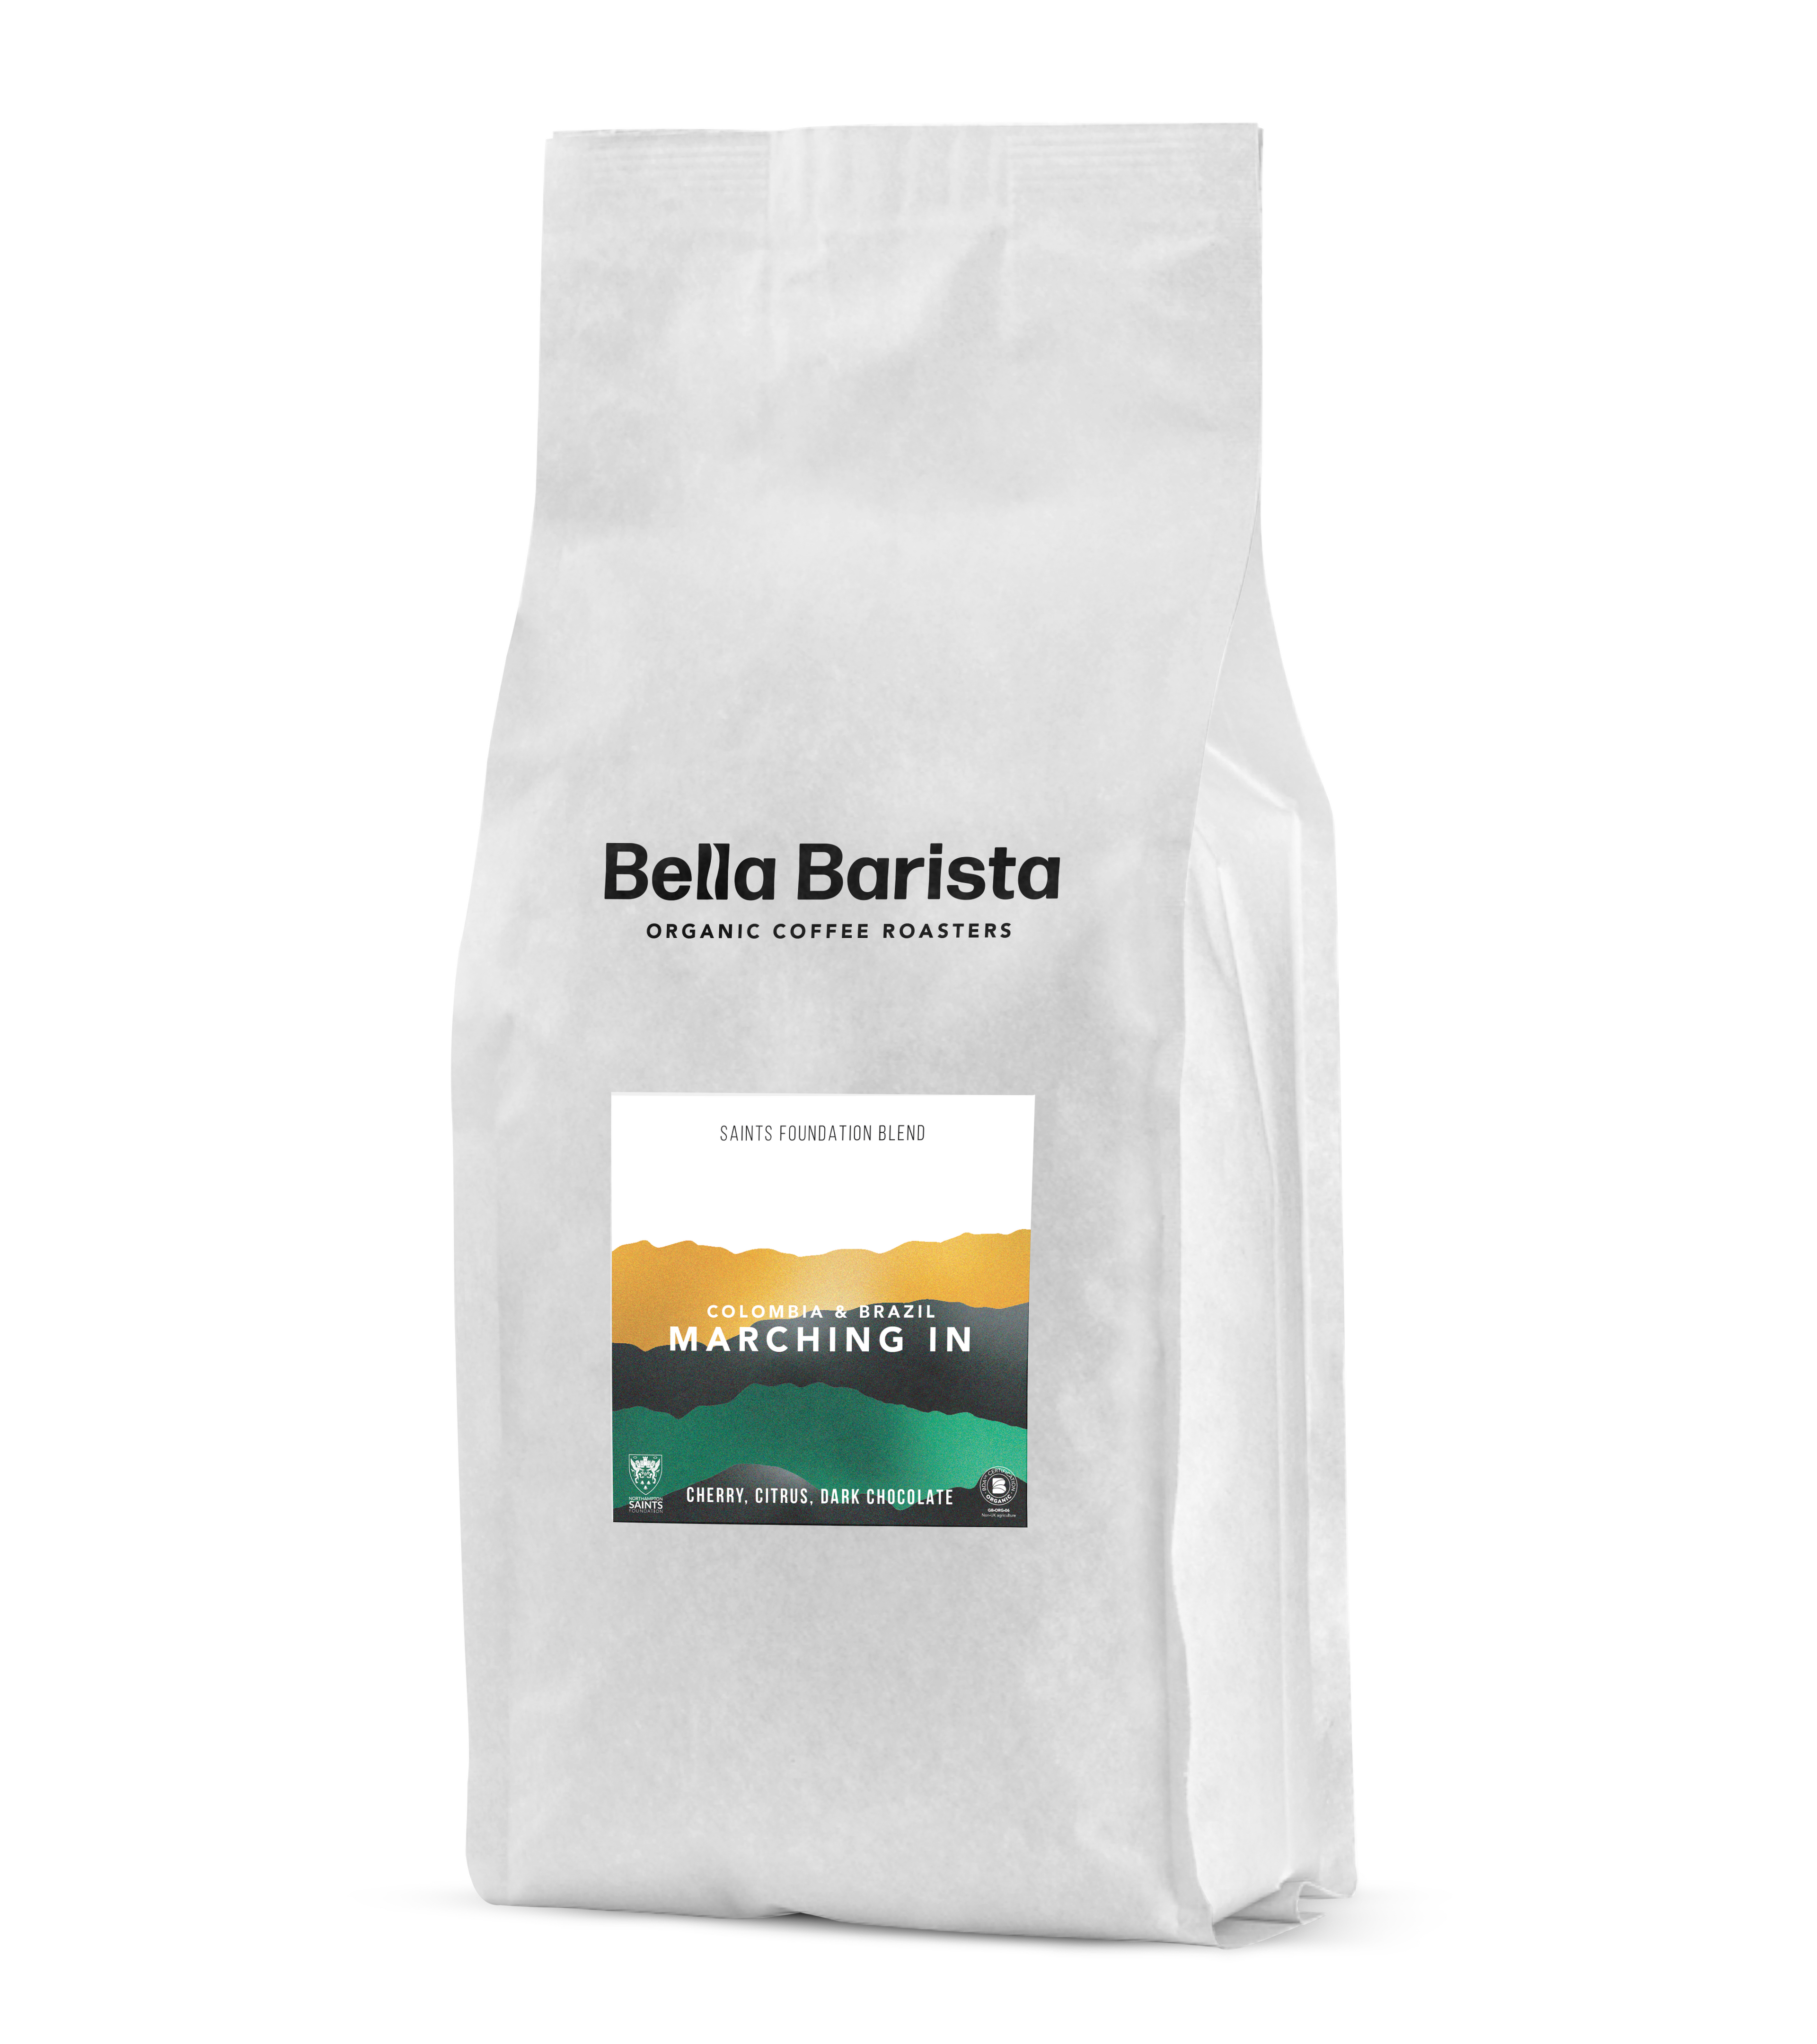 Marching In Blend Case - Organic Coffee